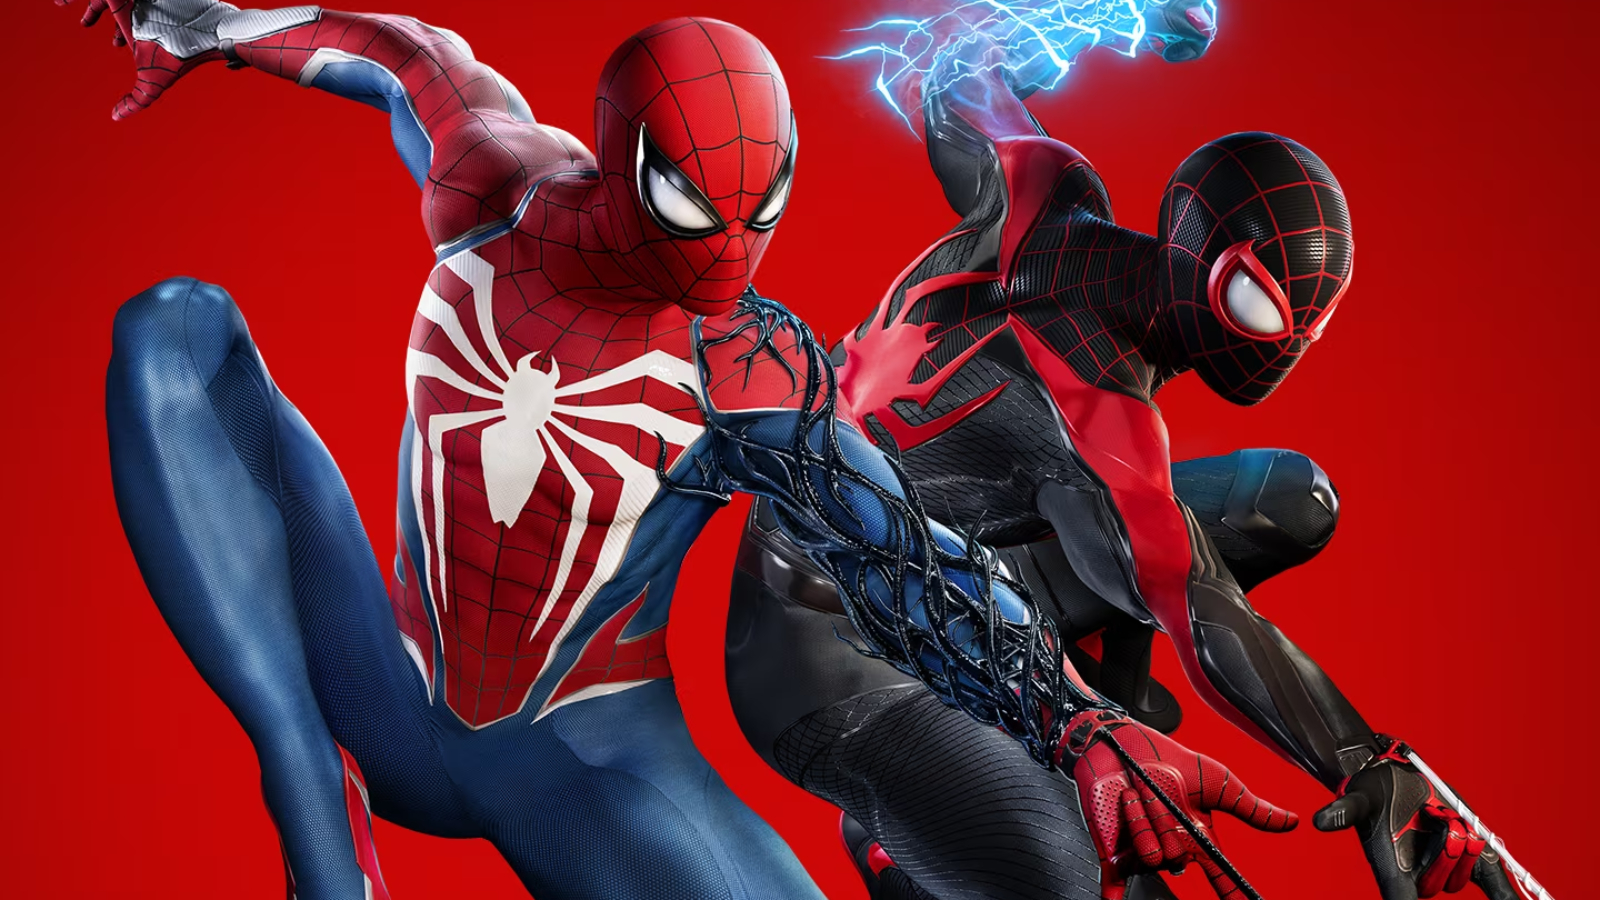 Sony Pictures - Big goals for our Spider Society team with this